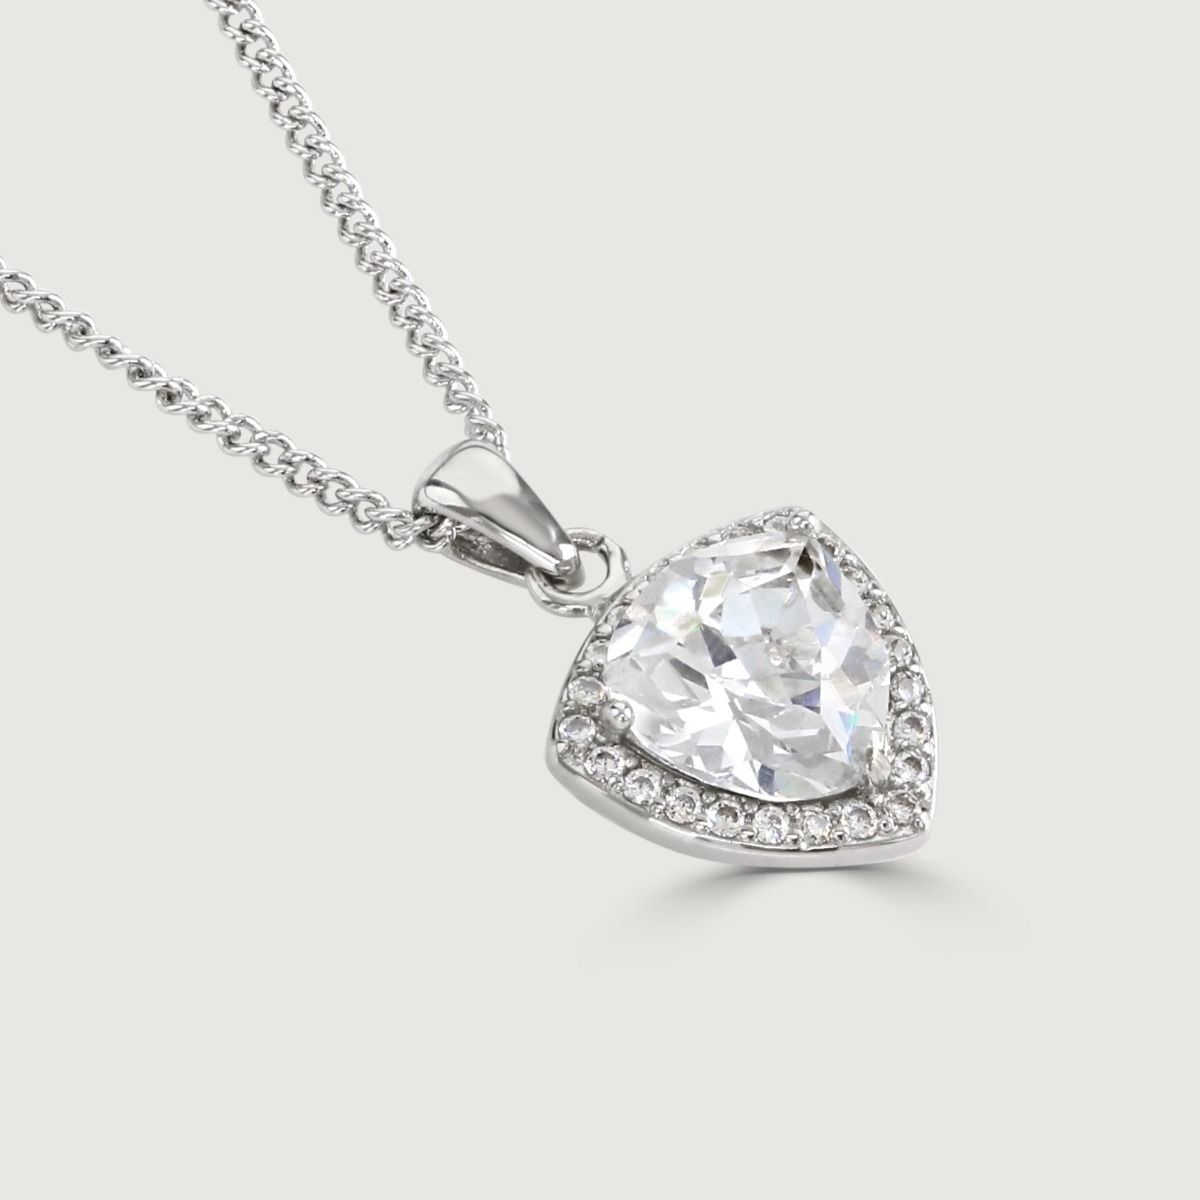 Experience enchantment through our Clear Trillion Halo Pendant. The impressive trillion-cut centre stone emanates a captivating allure. Effortlessly elevate your style with this exquisite piece, infusing timeless glamour into any ensemble.